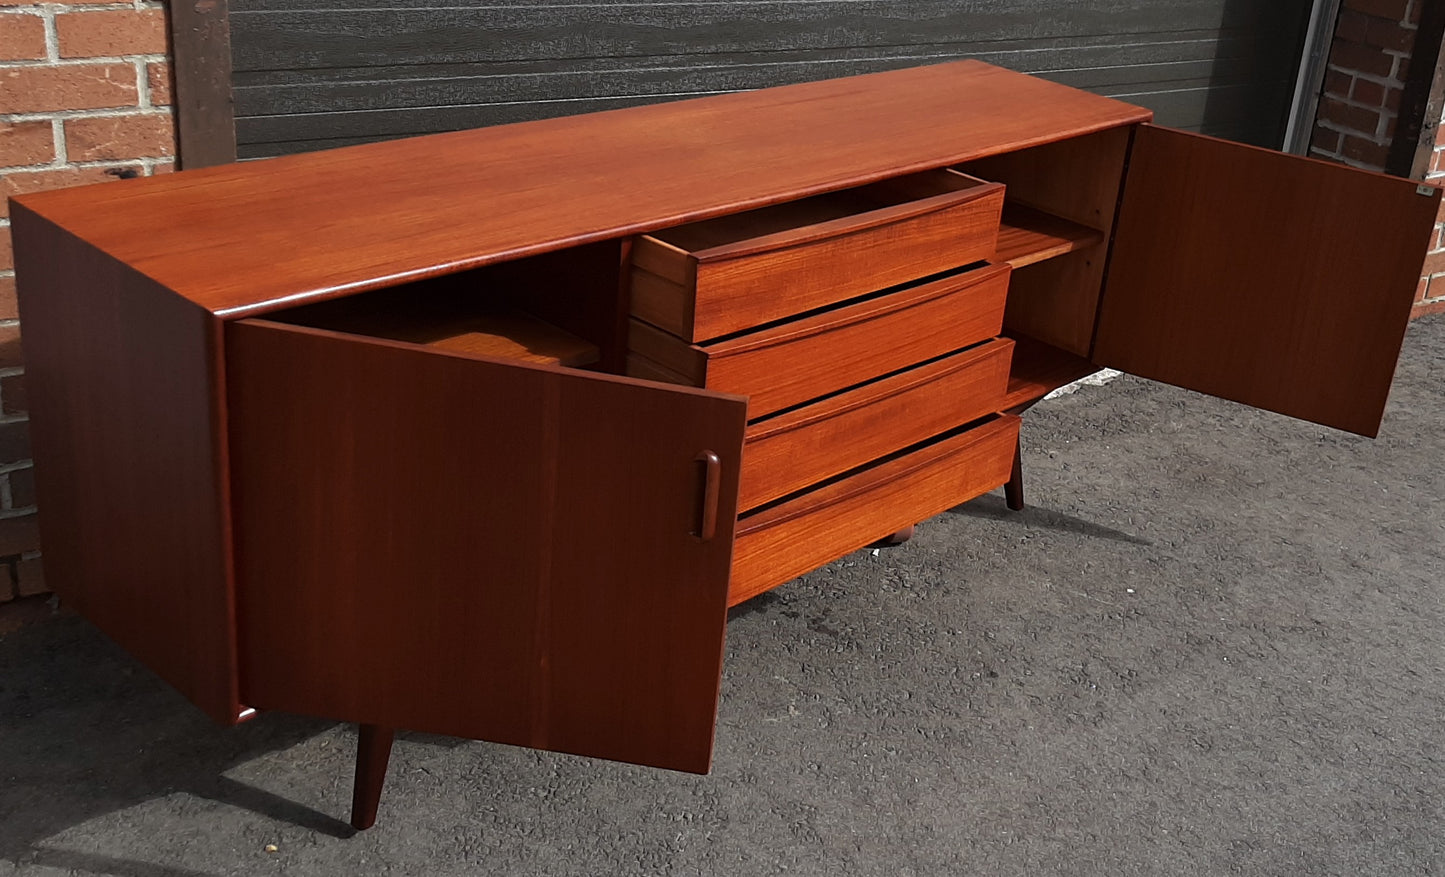 REFINISHED Danish MCM Teak sideboard Credenza TV Console 6 ft, narrow, PERFECT